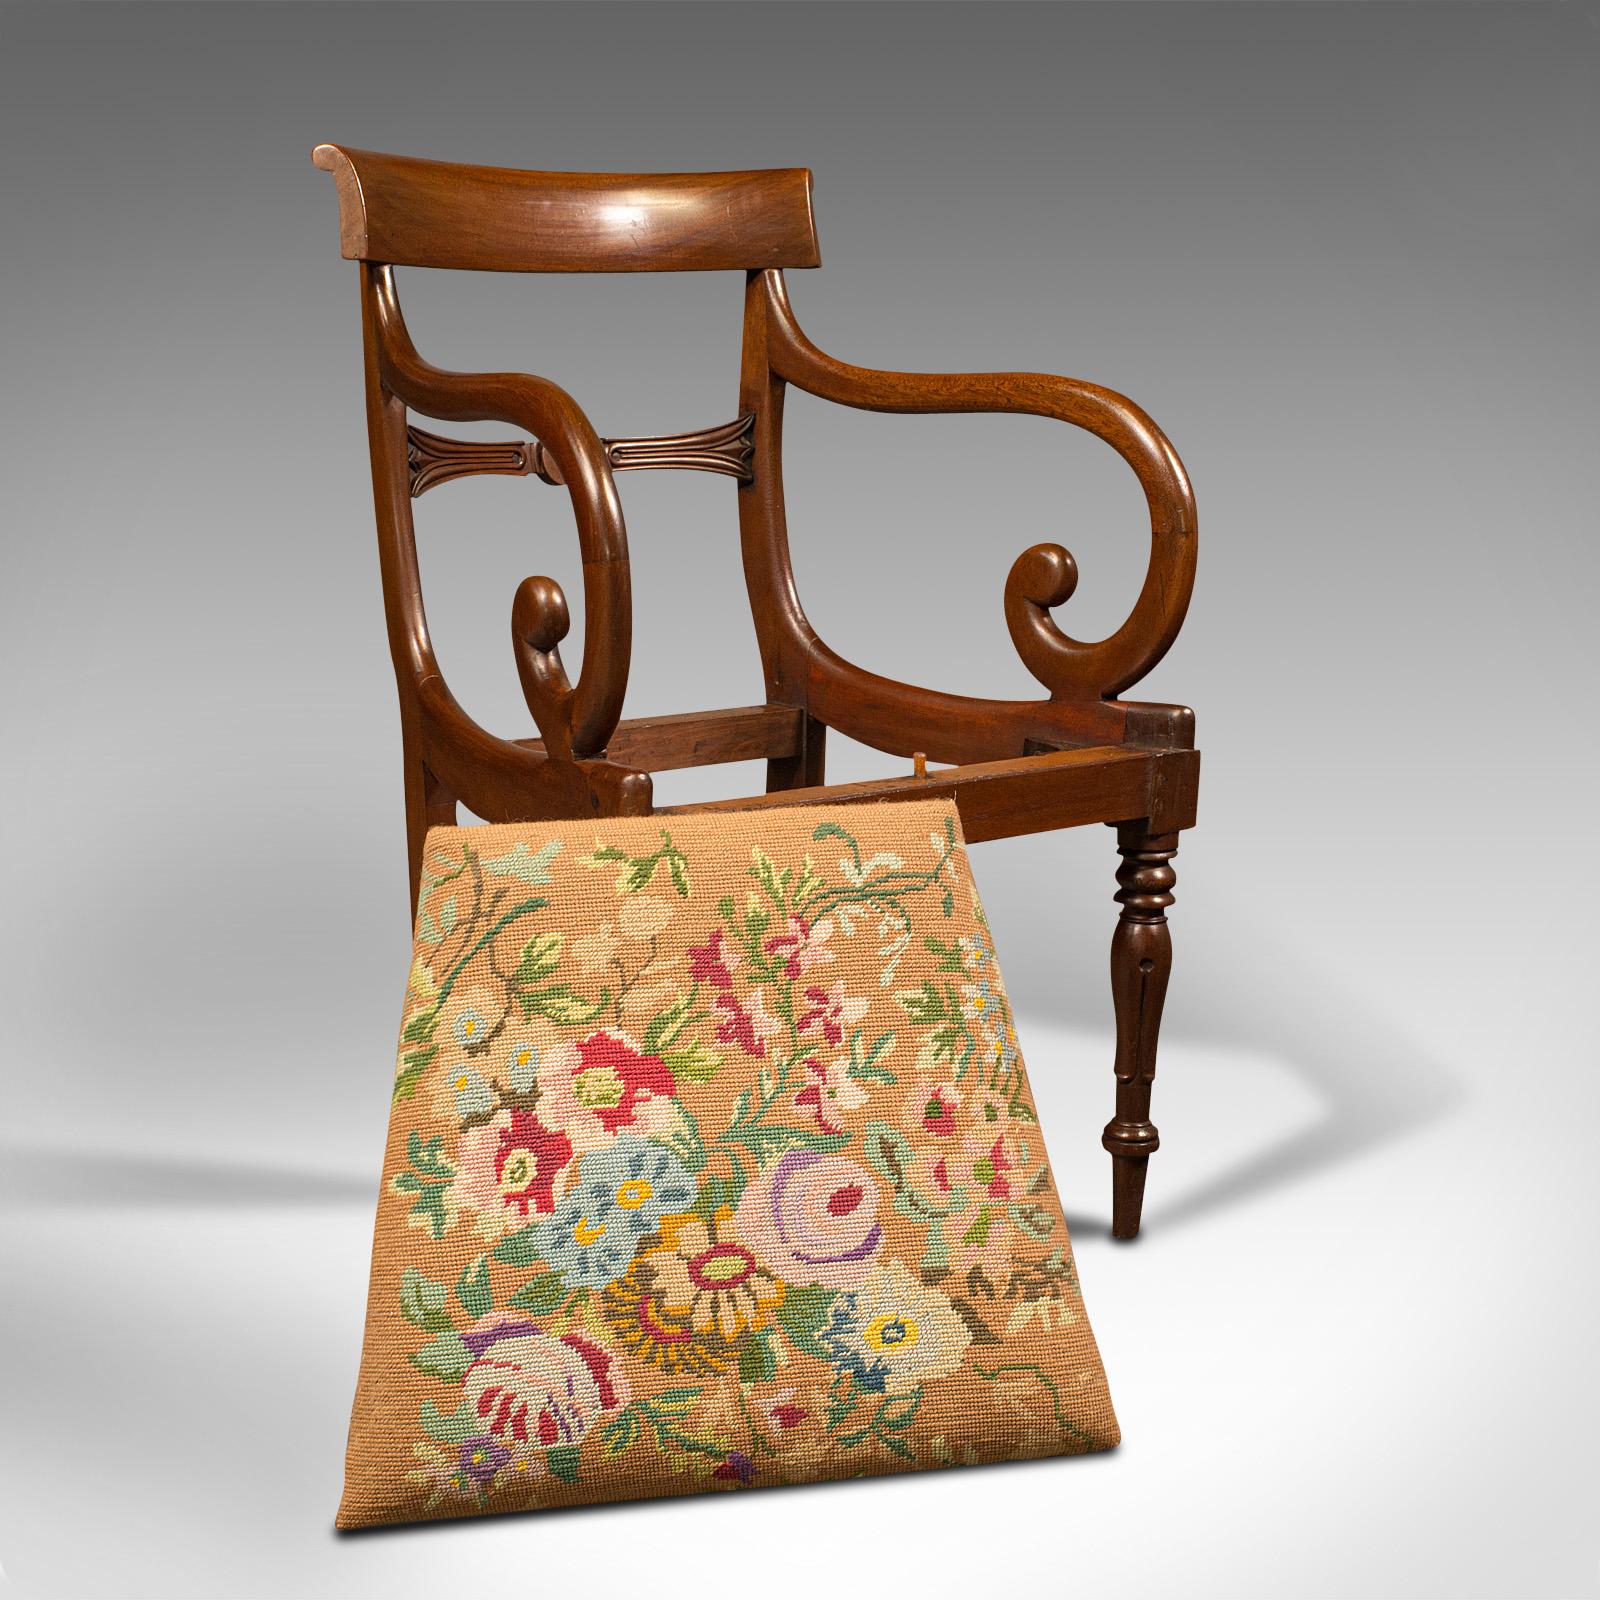 Antique Scroll Arm Chair, English, Armchair, Desk, Needlepoint, Regency, C.1830 For Sale 5